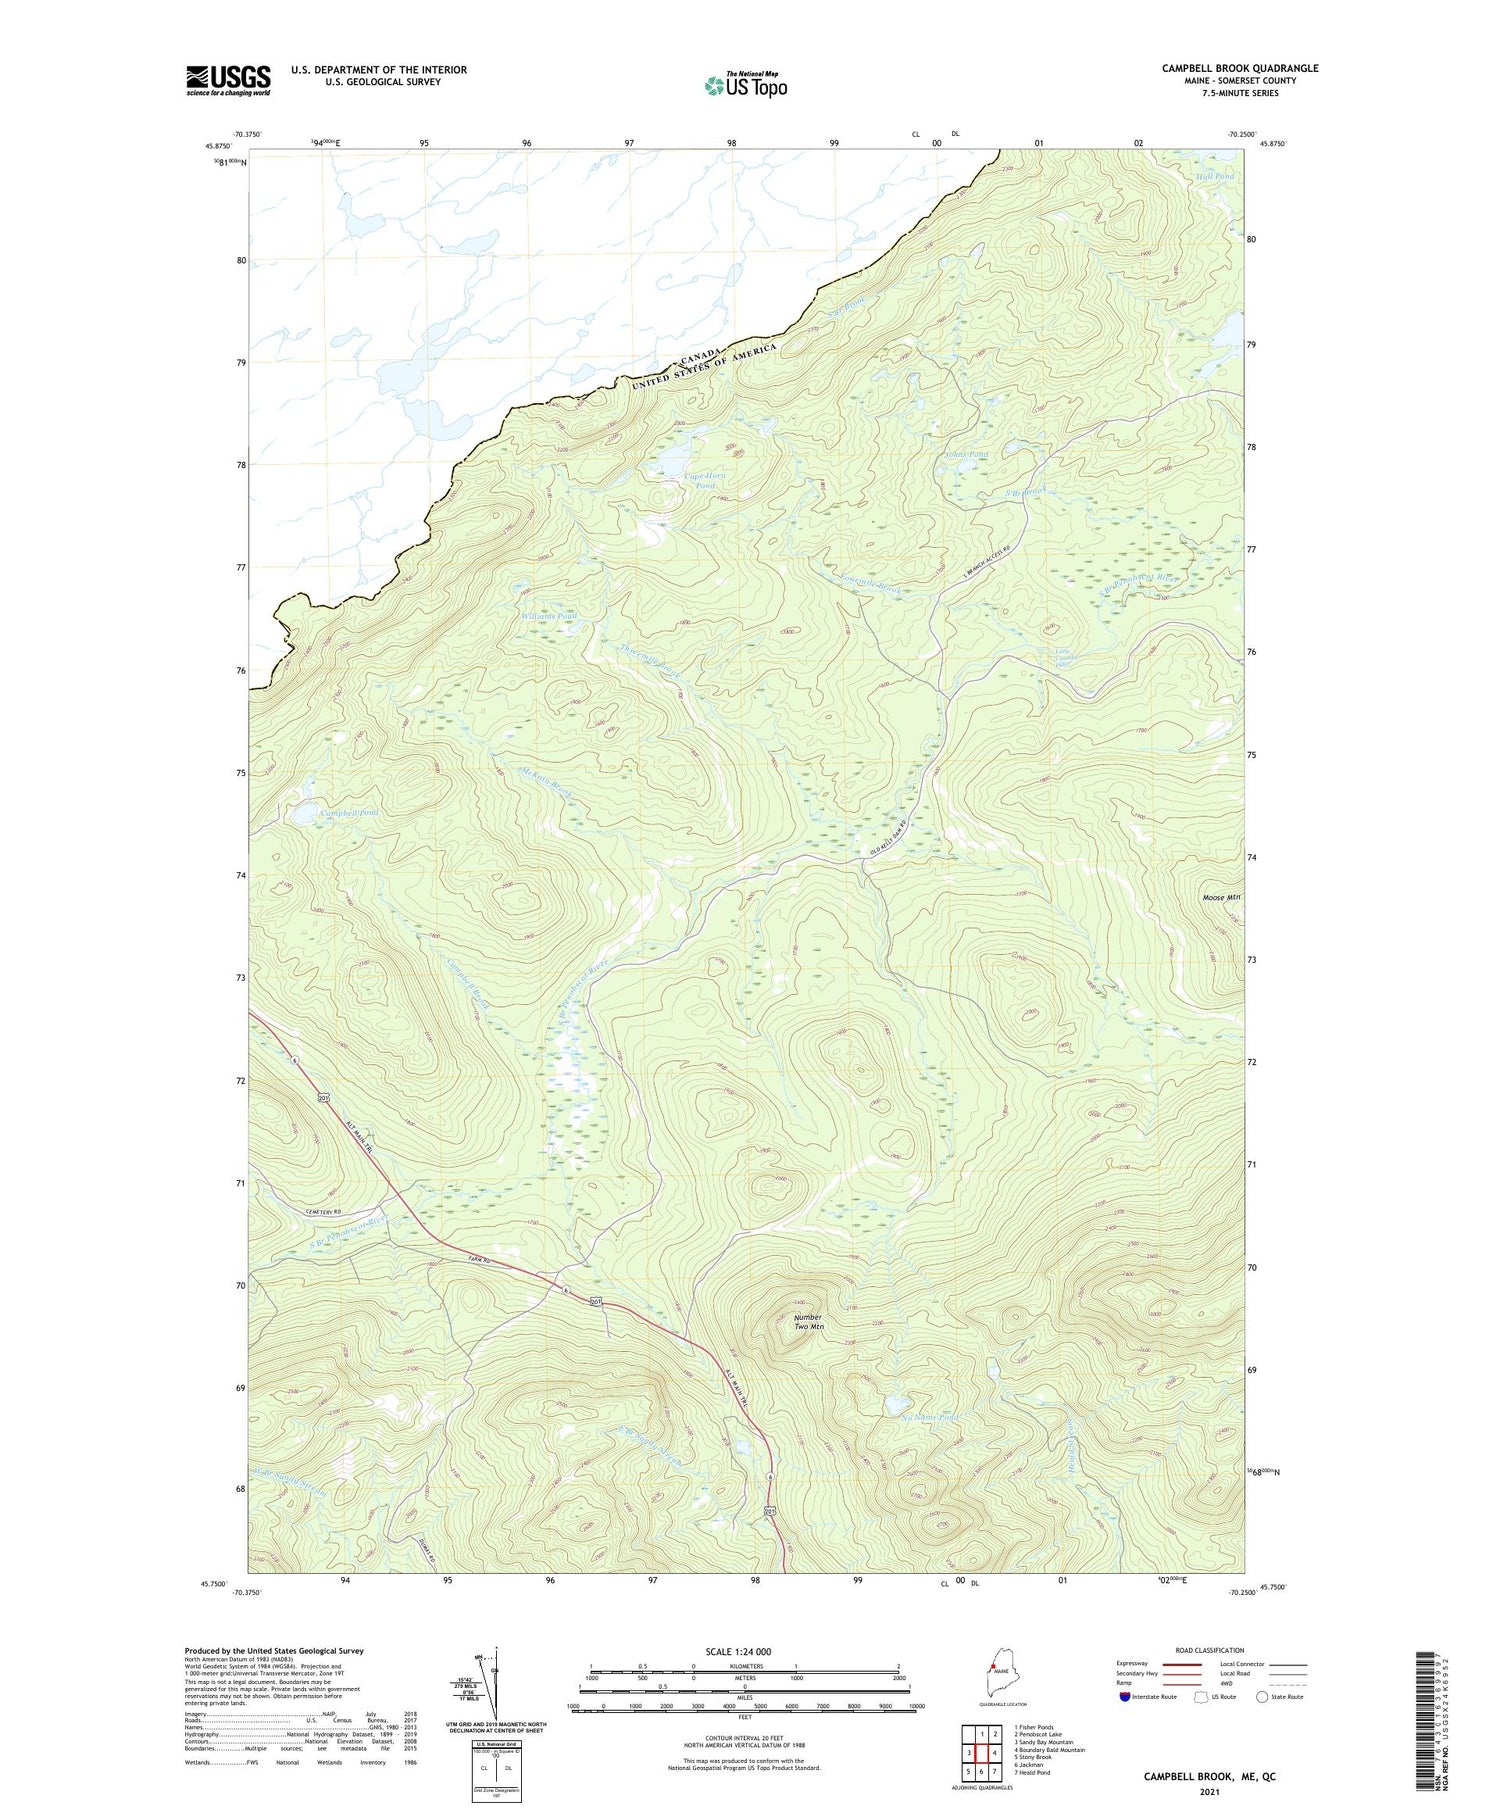 Campbell Brook Maine US Topo Map Image